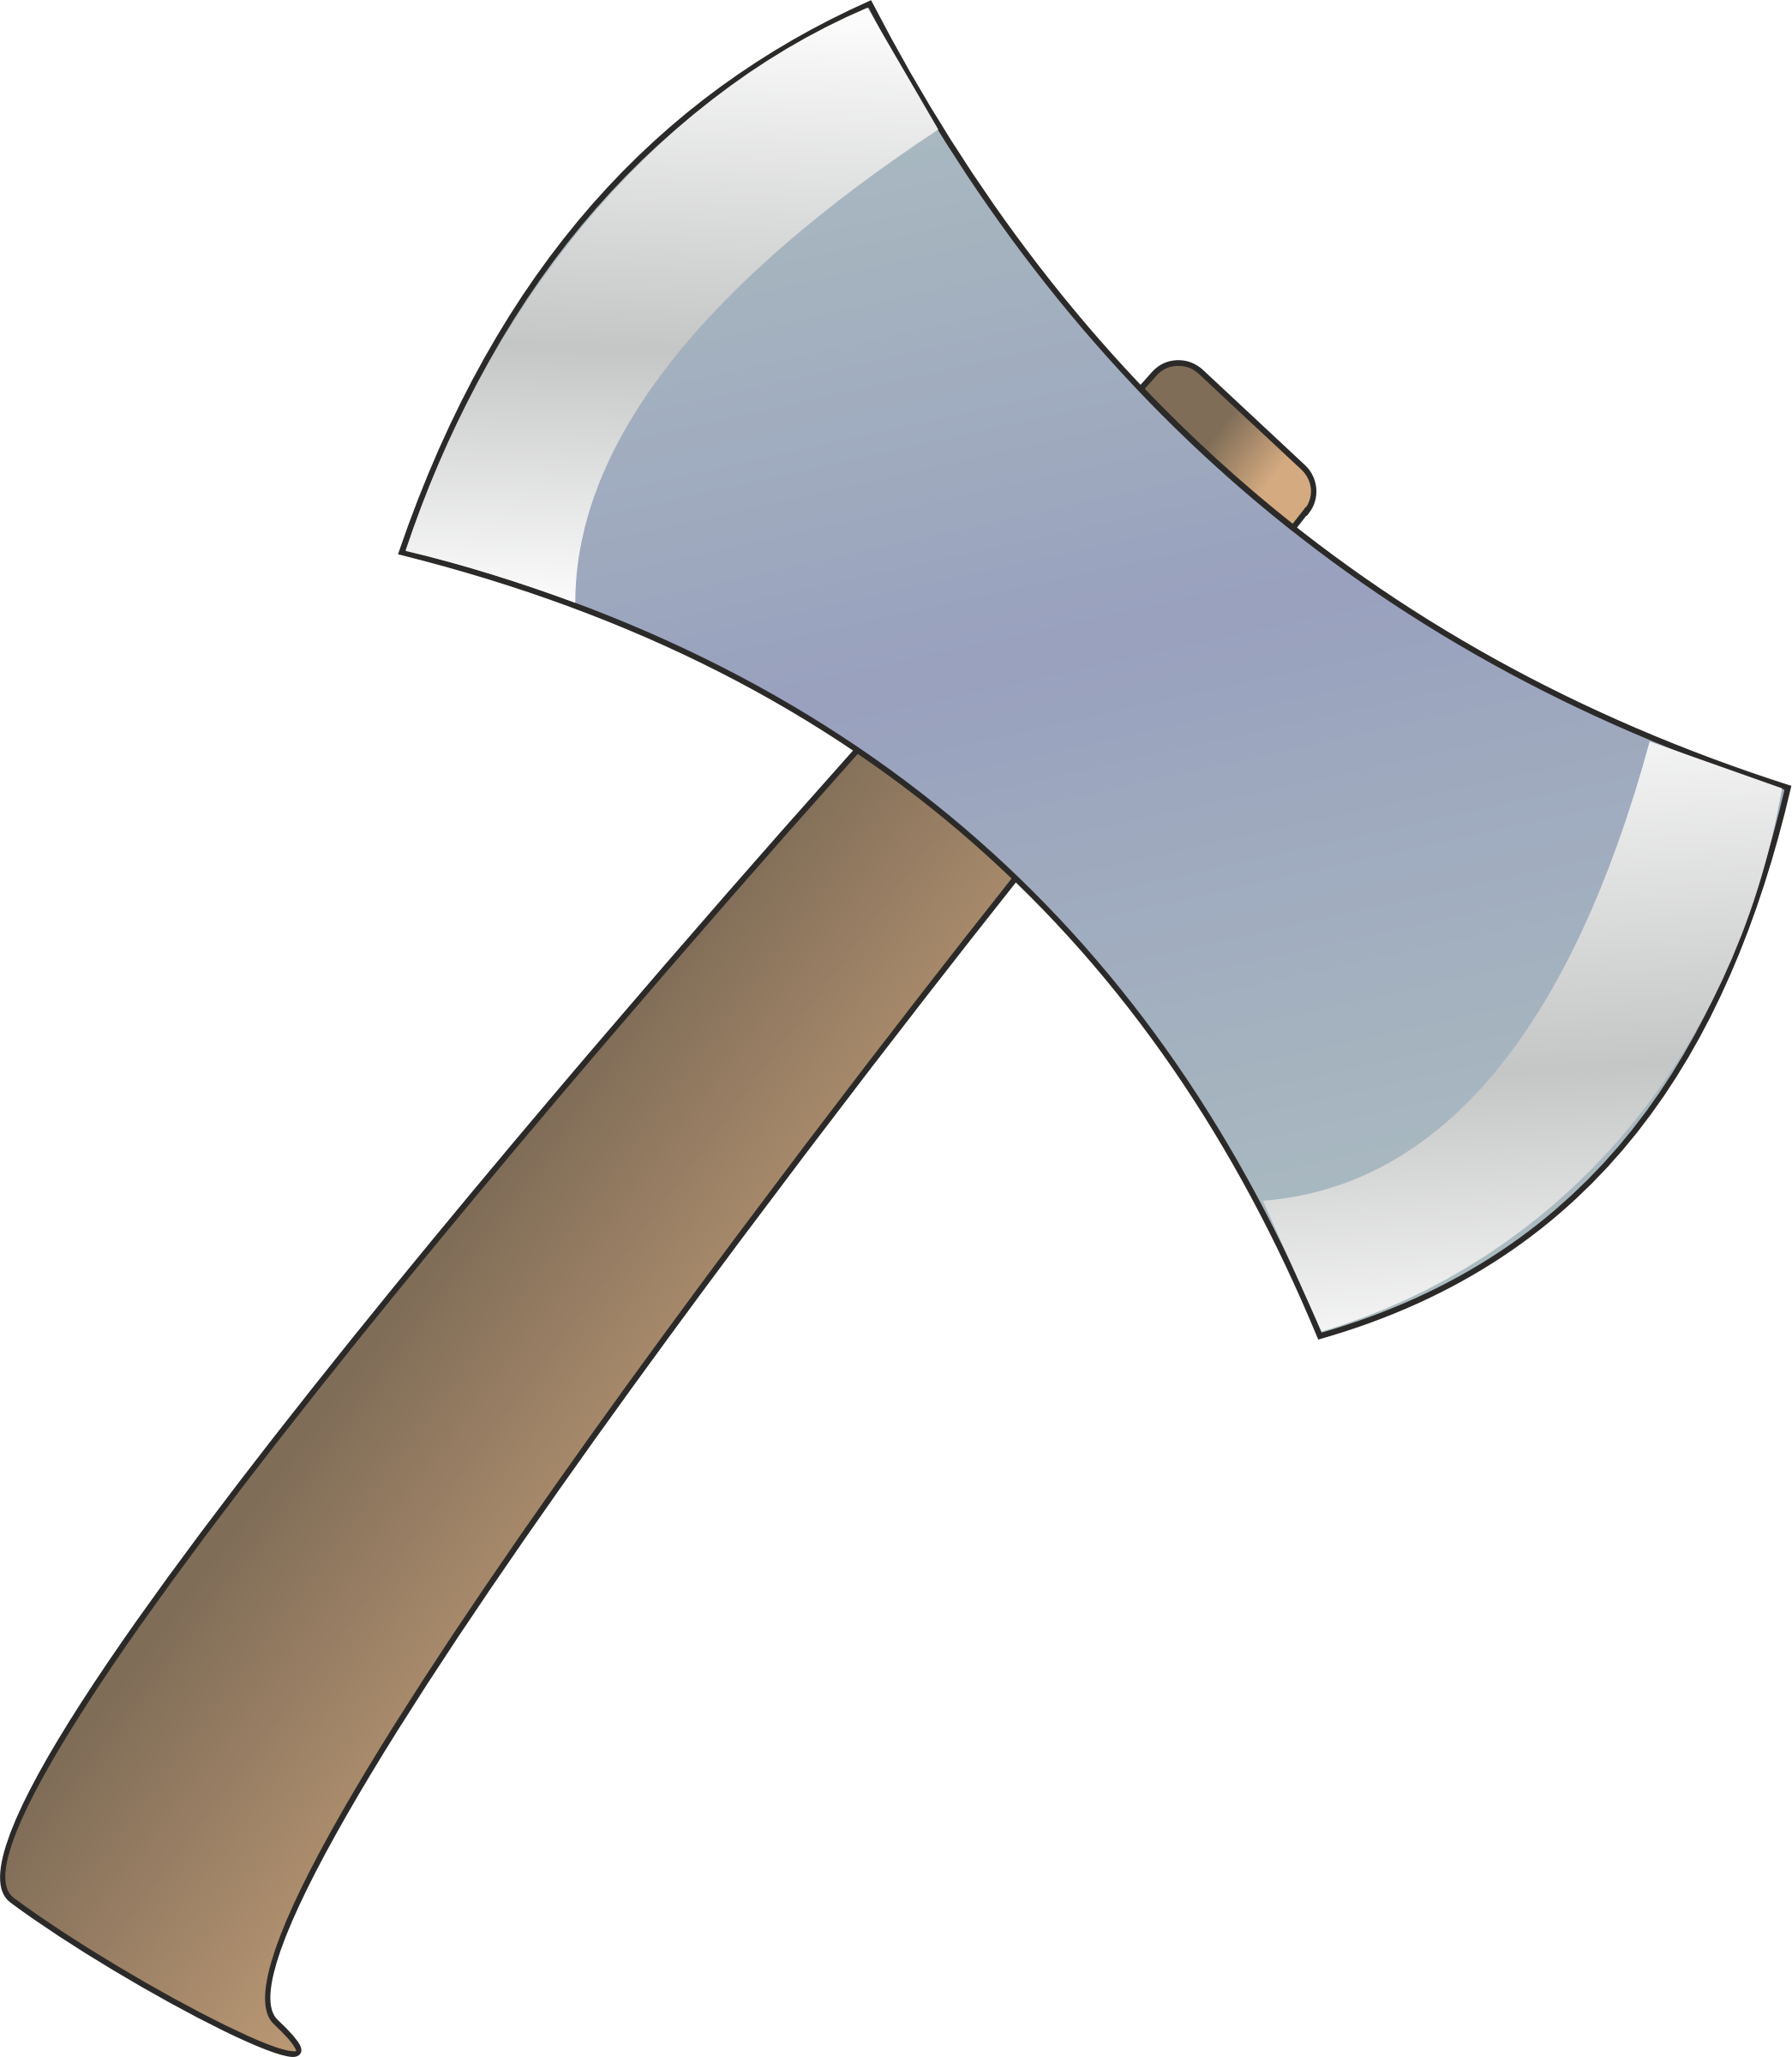 Big Image - Clipart Image Of An Axe (2091x2400)